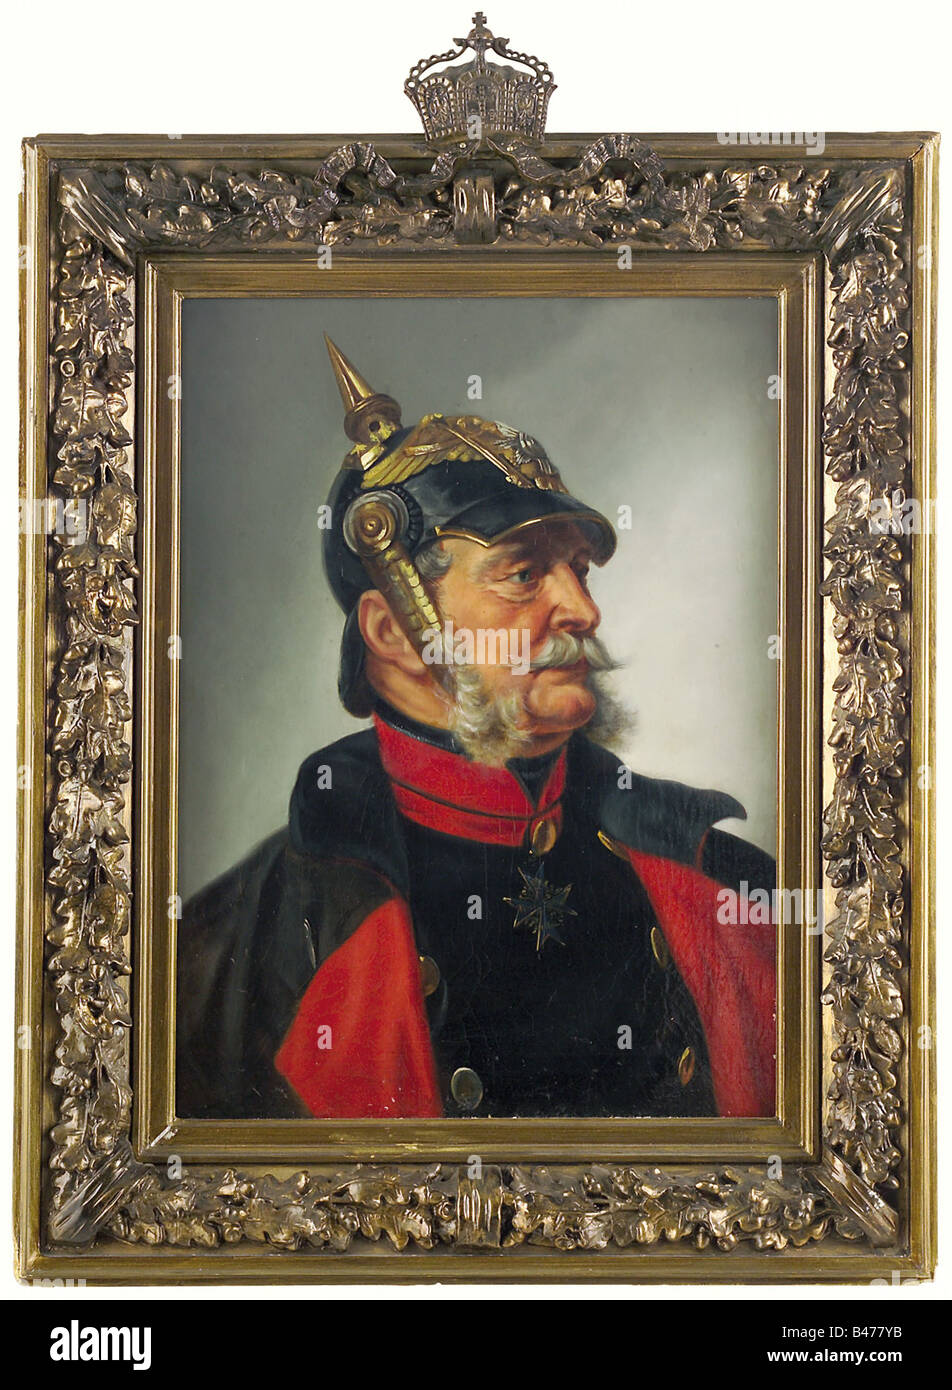 Emperor Wilhelm I, a portrait. Oil on canvas. The Emperor looking to his right in greatcoat. Marked on the rear of the canvas with 'J. Blach. fec.', in a gilded ornate frame with imperial crown in brass attached to the top batten. Frame edges slightly dented. Dimensions of picture 43 x 58 cm, dimensions with frame 63 x 81 cm. fine arts, people, 19th century, Prussian, Prussia, German, Germany, militaria, military, object, objects, stills, clipping, clippings, cut out, cut-out, cut-outs, painting, paintings, fine arts, art, illustration, man, men, male, Artist's Copyright has not to be cleared Stock Photo